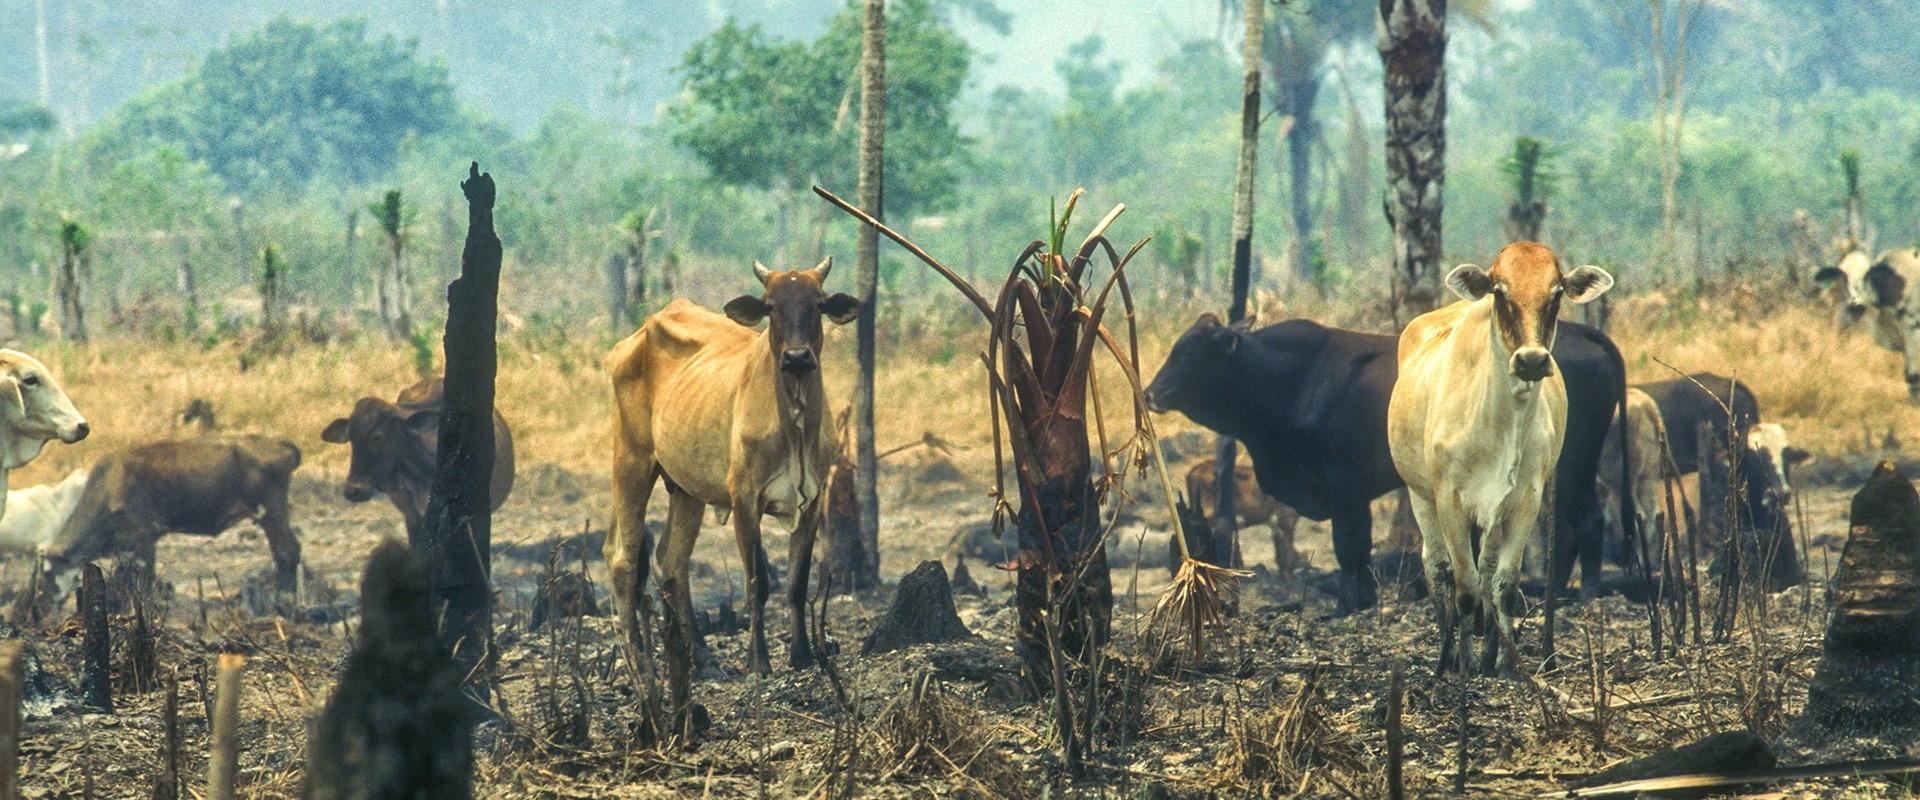 Deforestation in the Amazon Basin of Brazil for cattle ranching, by Brasil2